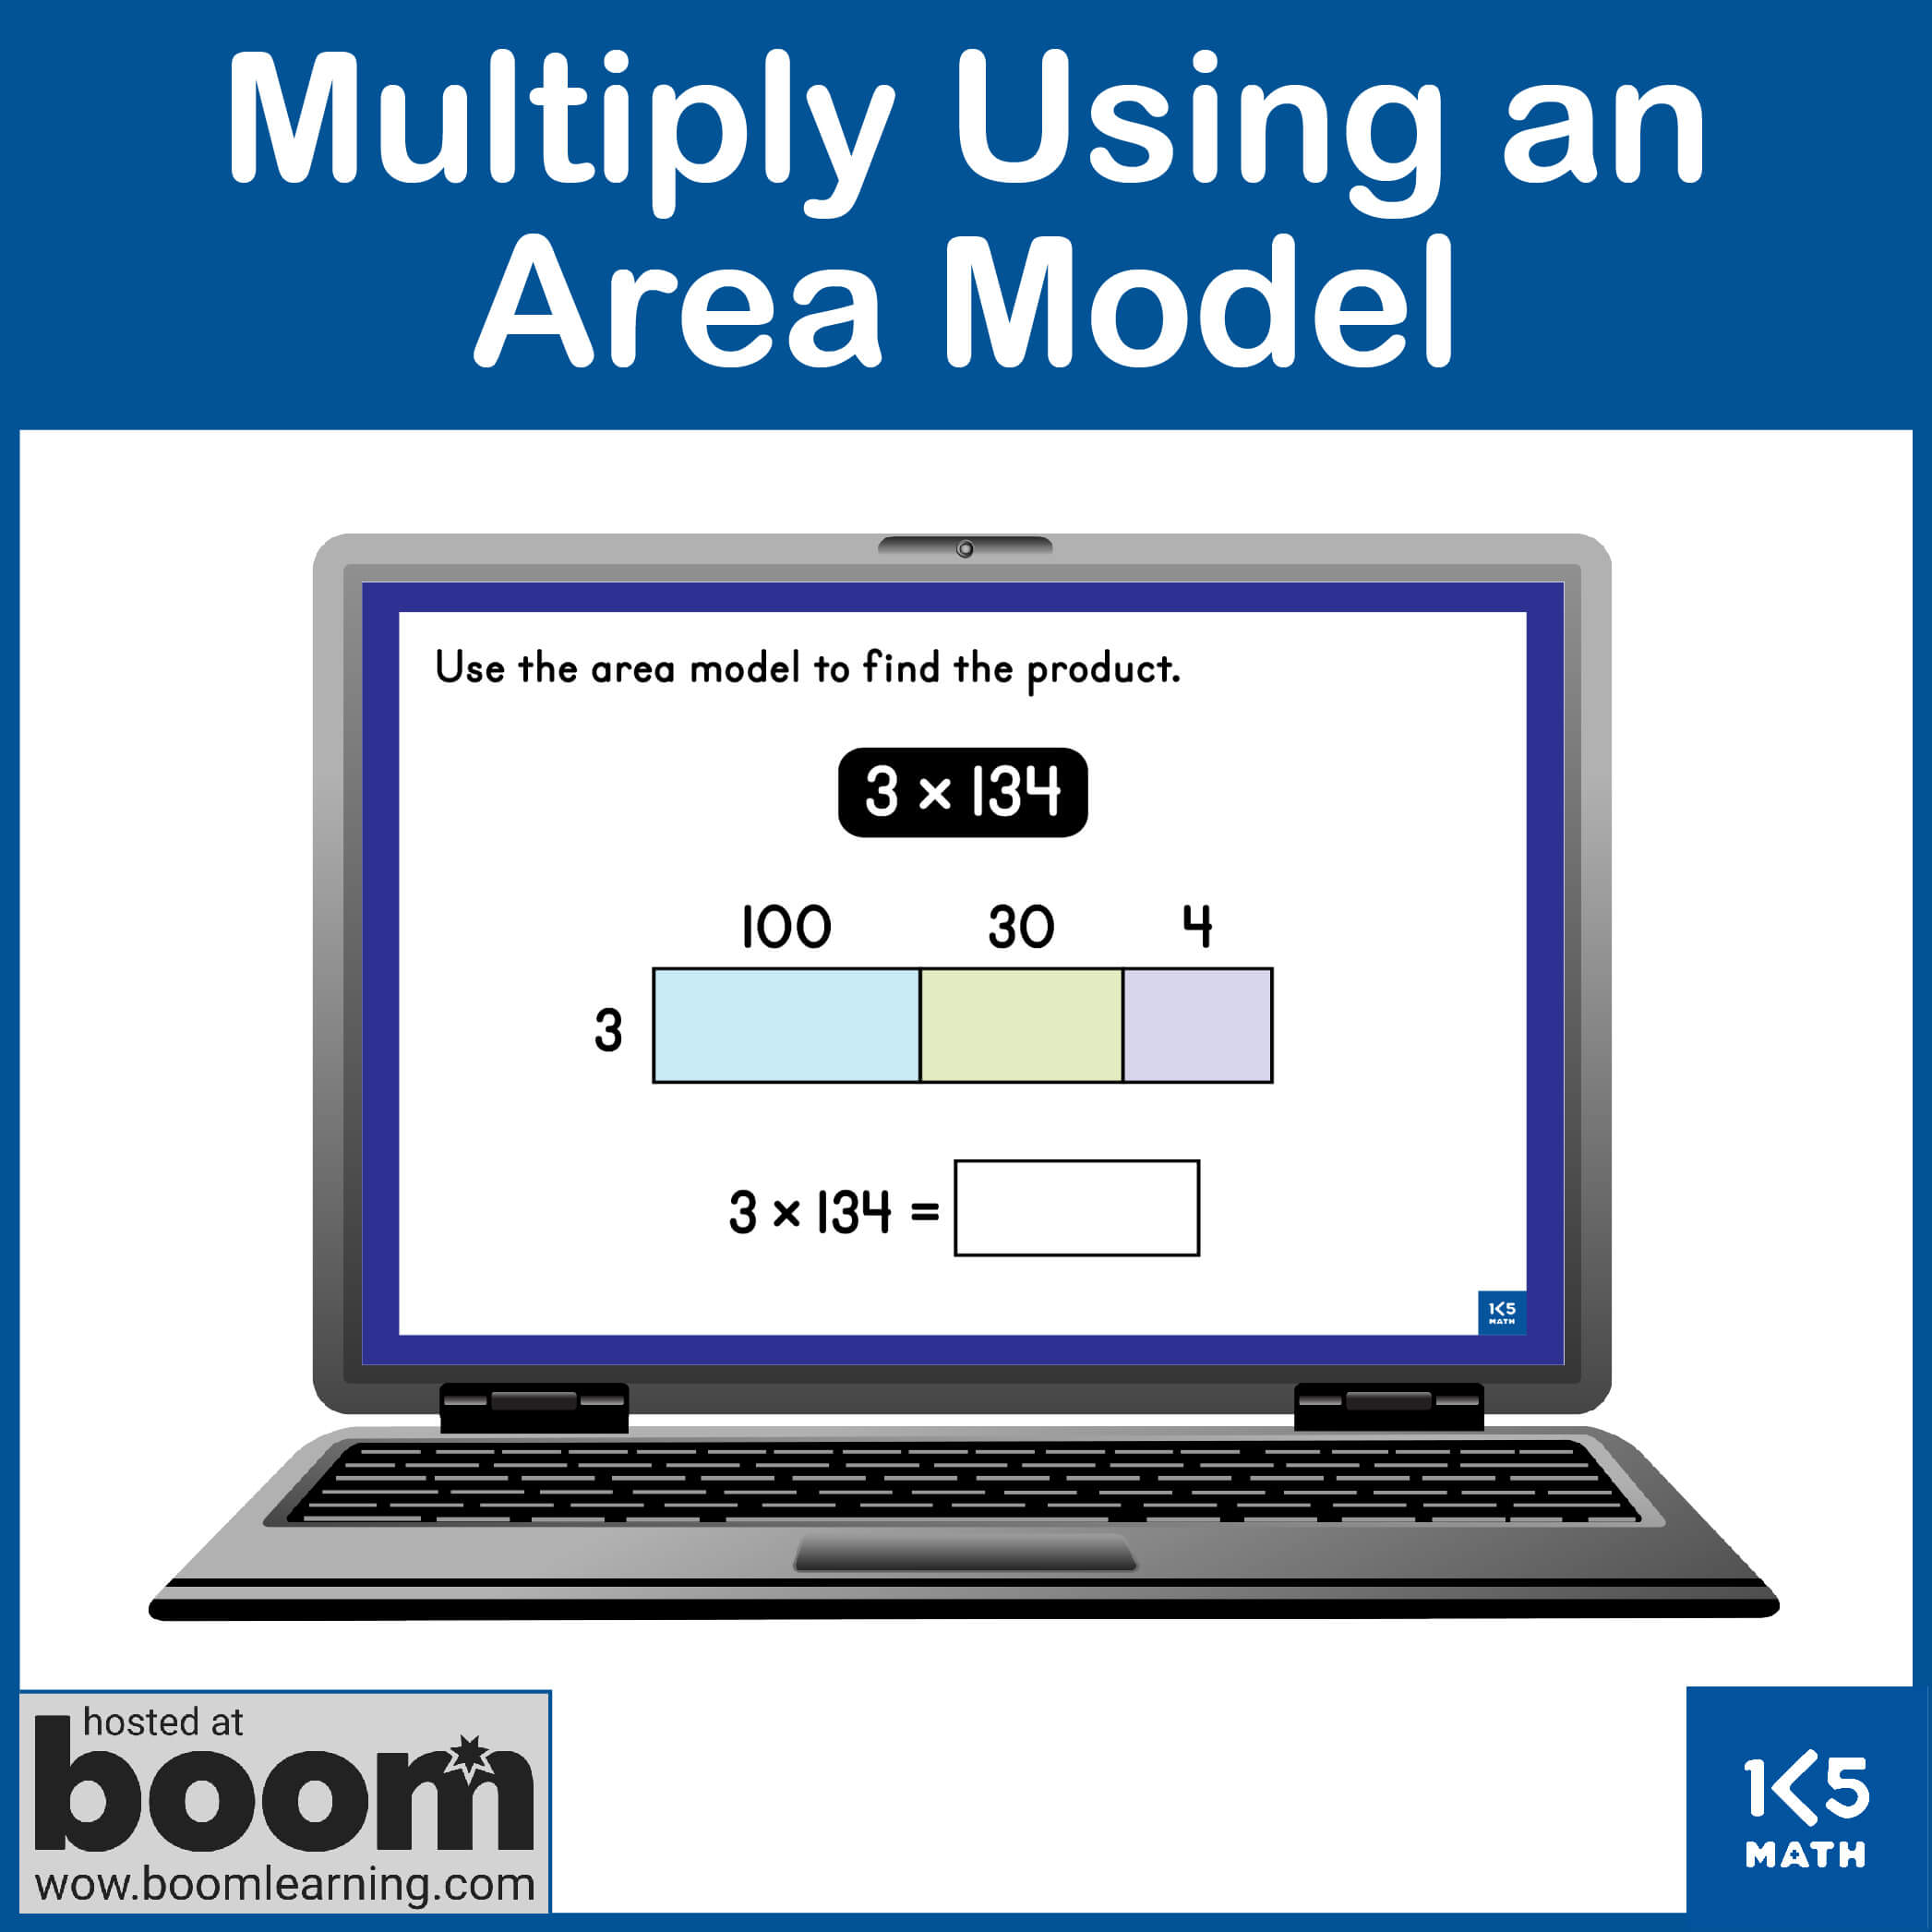 Boom Cards: Multiply Using an Area Model